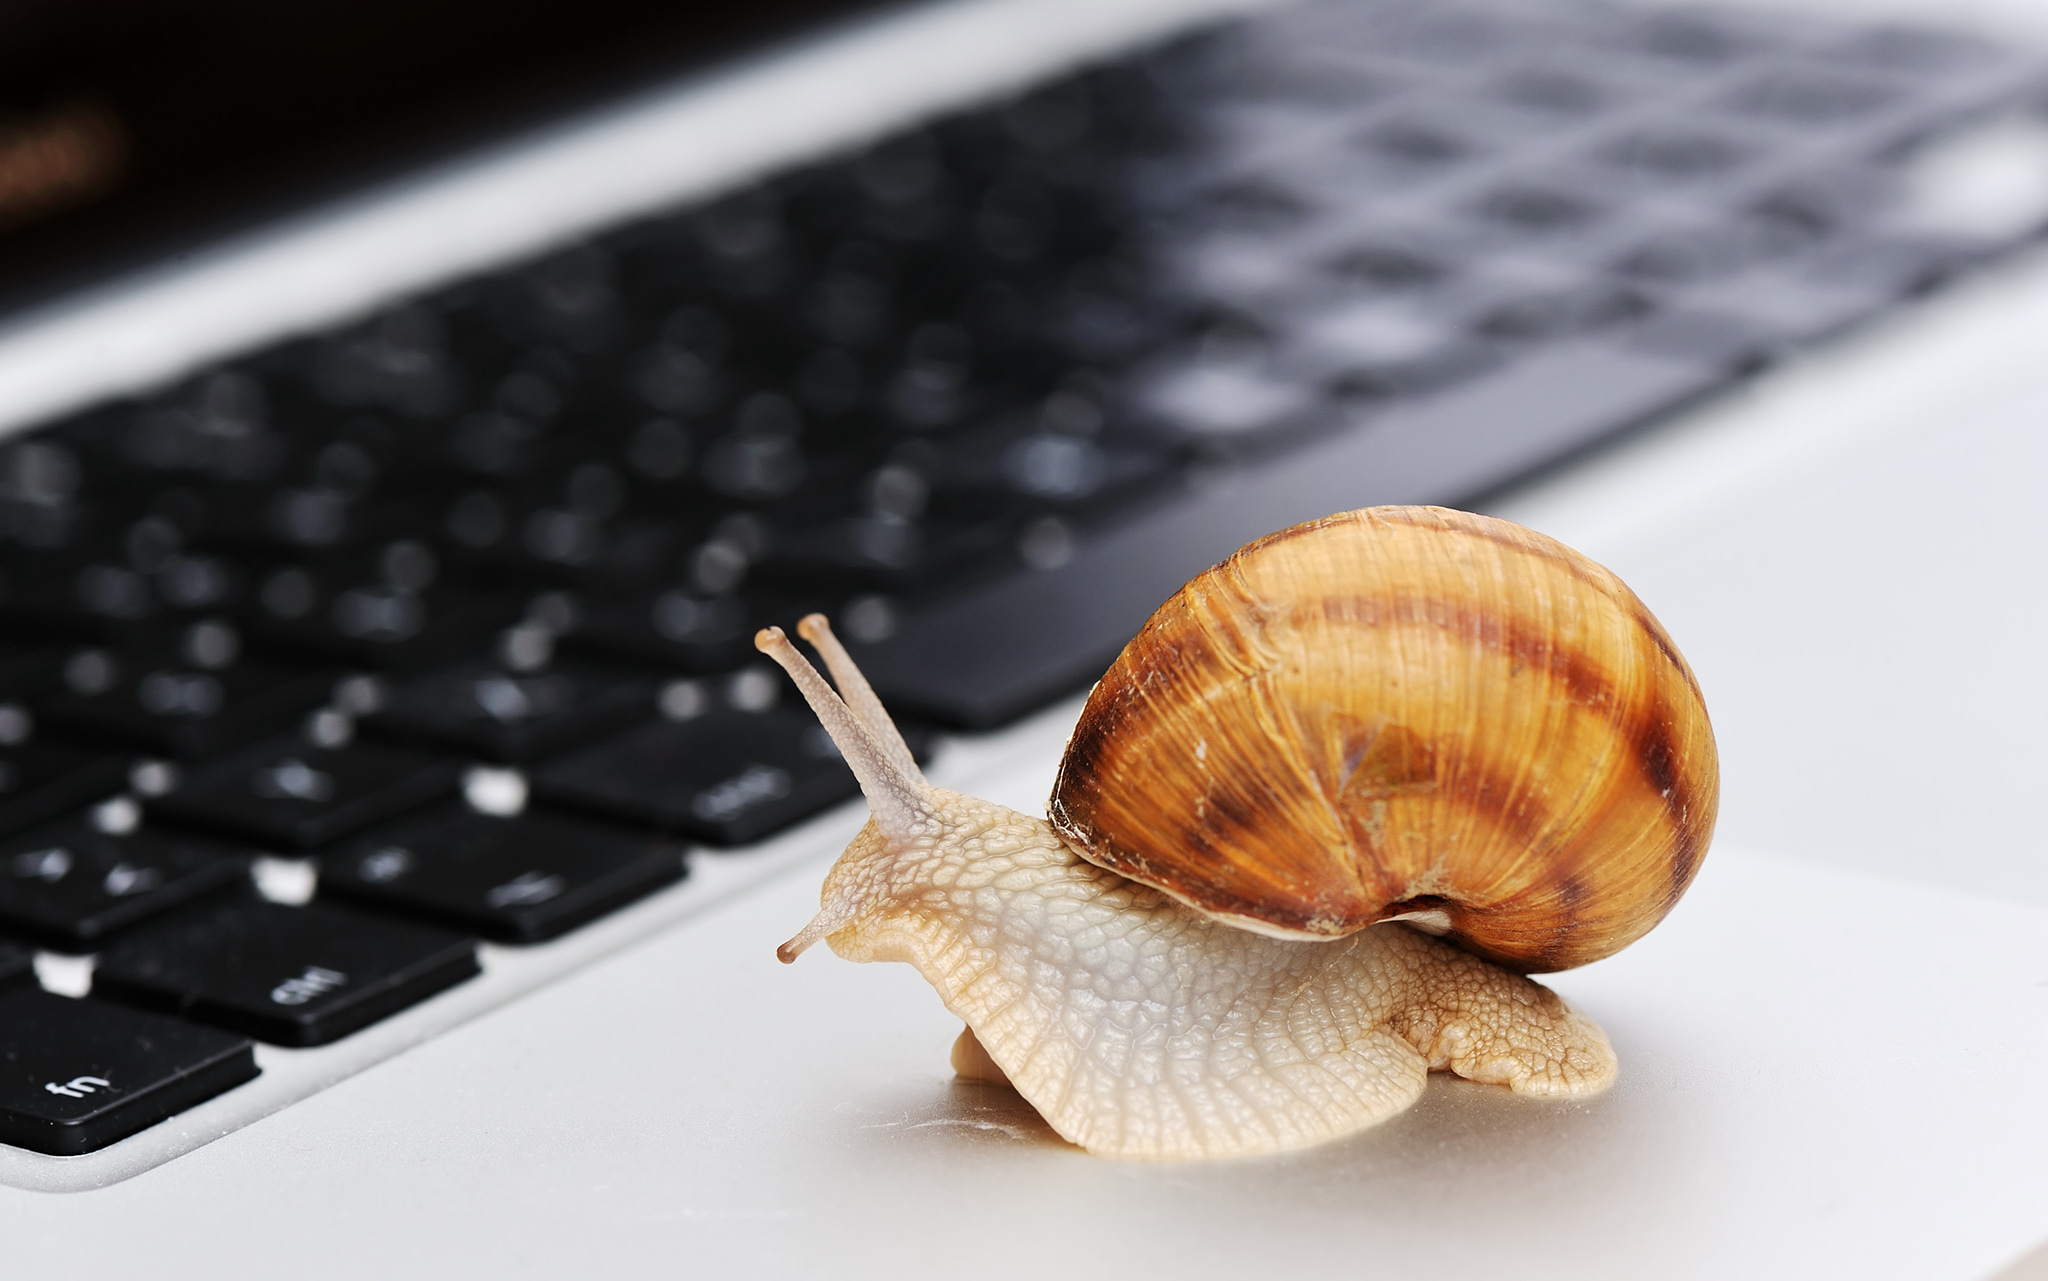 Snail on a desk in front of a keyboard.